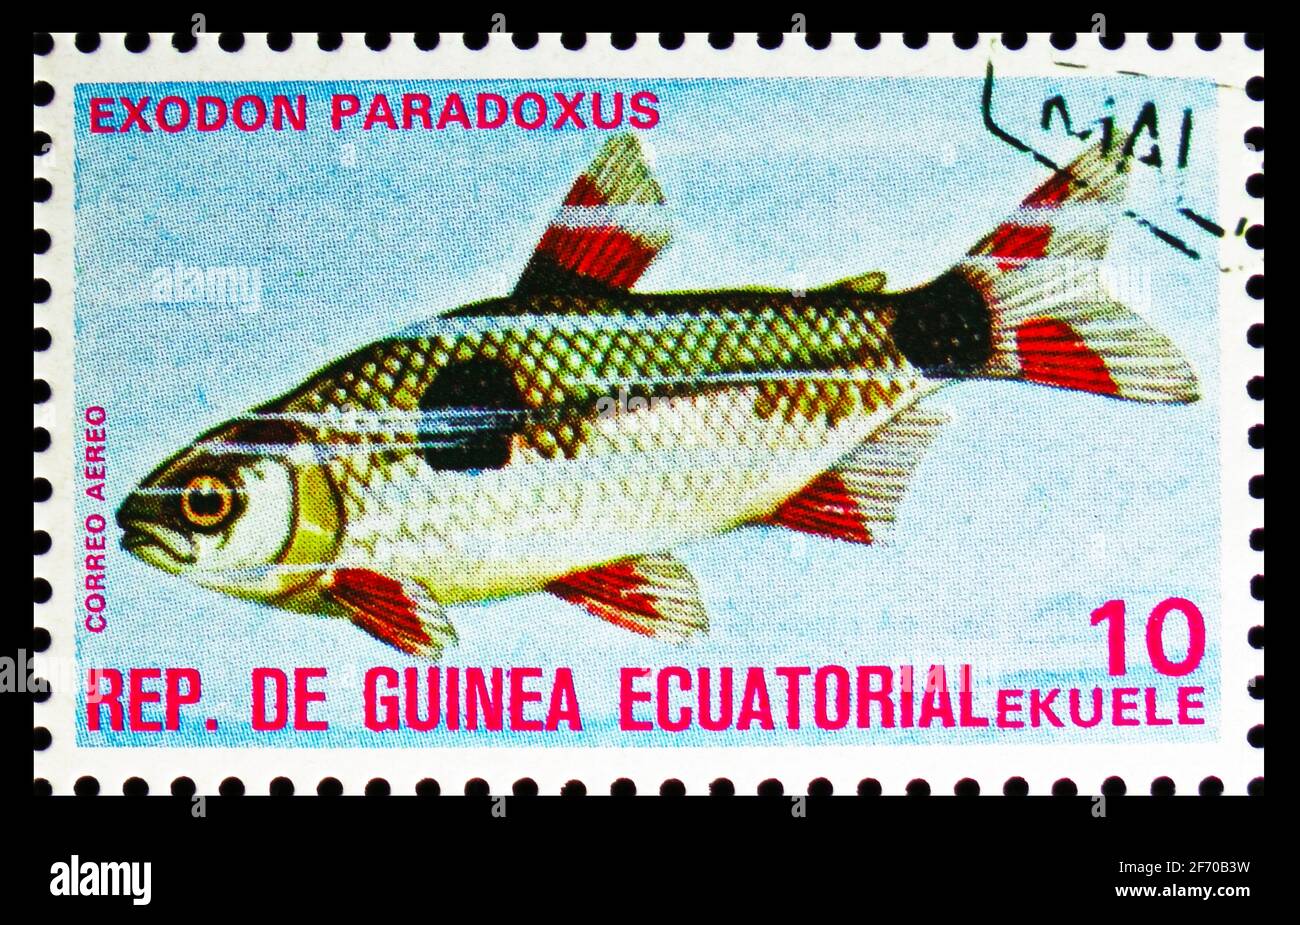 MOSCOW, RUSSIA - DECEMBER 19, 2020: Postage stamp printed in Equatorial Guinea shows Bucktooth Tetra (Exodon paradoxus), Fishes (I) exotic serie, circ Stock Photo